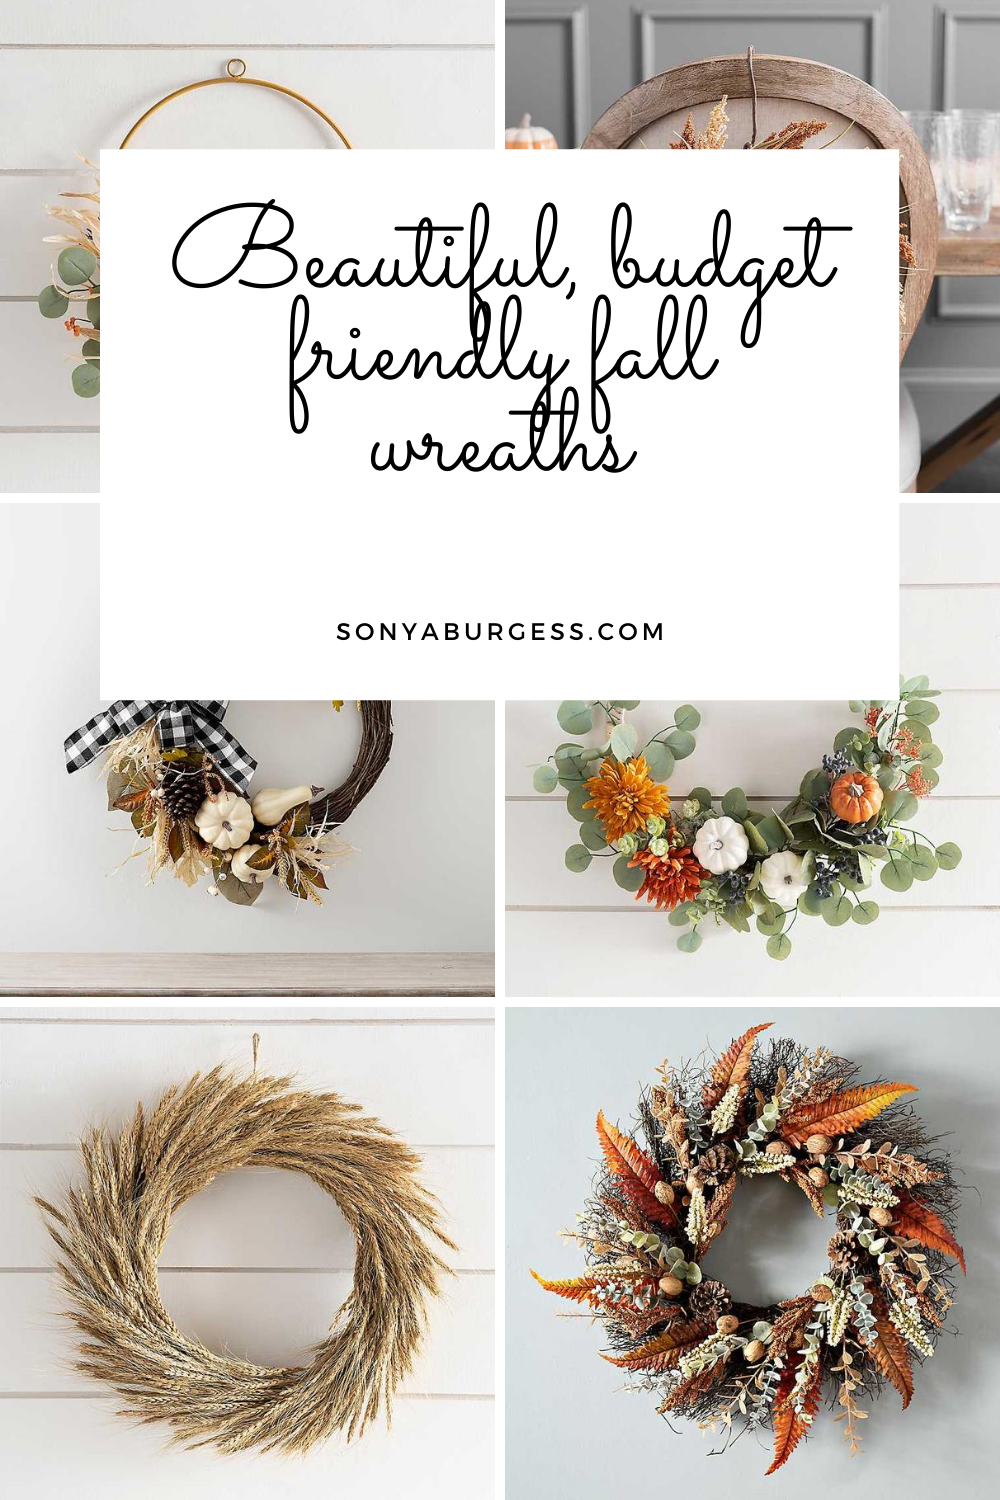 Wait until you see these beautiful, budget friendly fall wreaths.